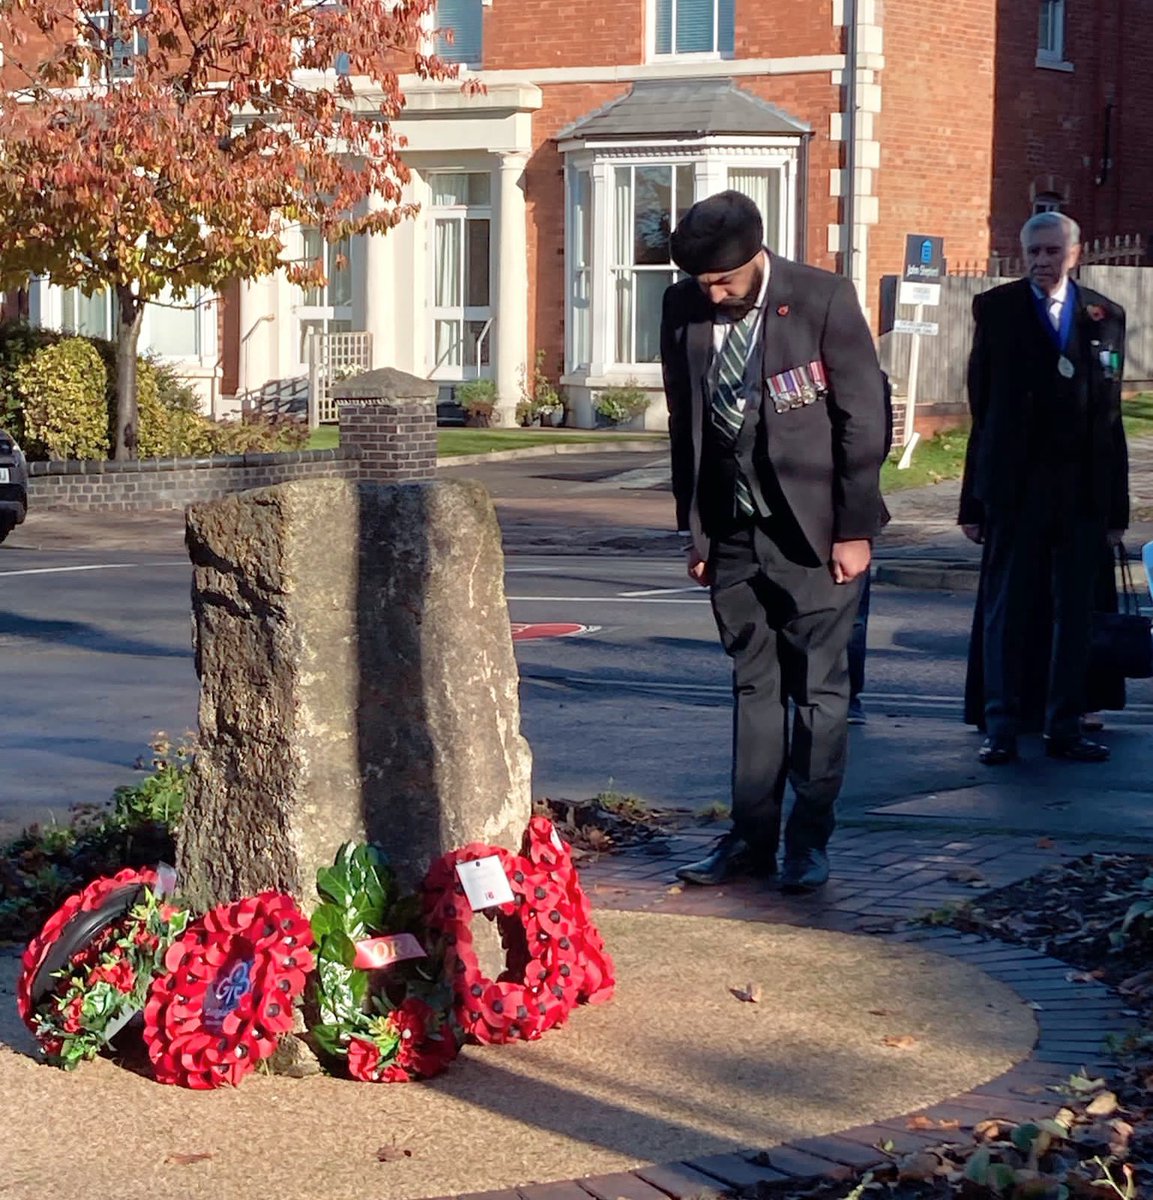 Armistice Day in Olton with residents, Councillors and RBL to remember our fallen. A very moving ceremony this #SaturdayMorning. An honor to lay a wreath in Remembrance #LestWeForget #WeWillRememberThem (photos courtesy of @JoshONyons) #cenotaph #patriots